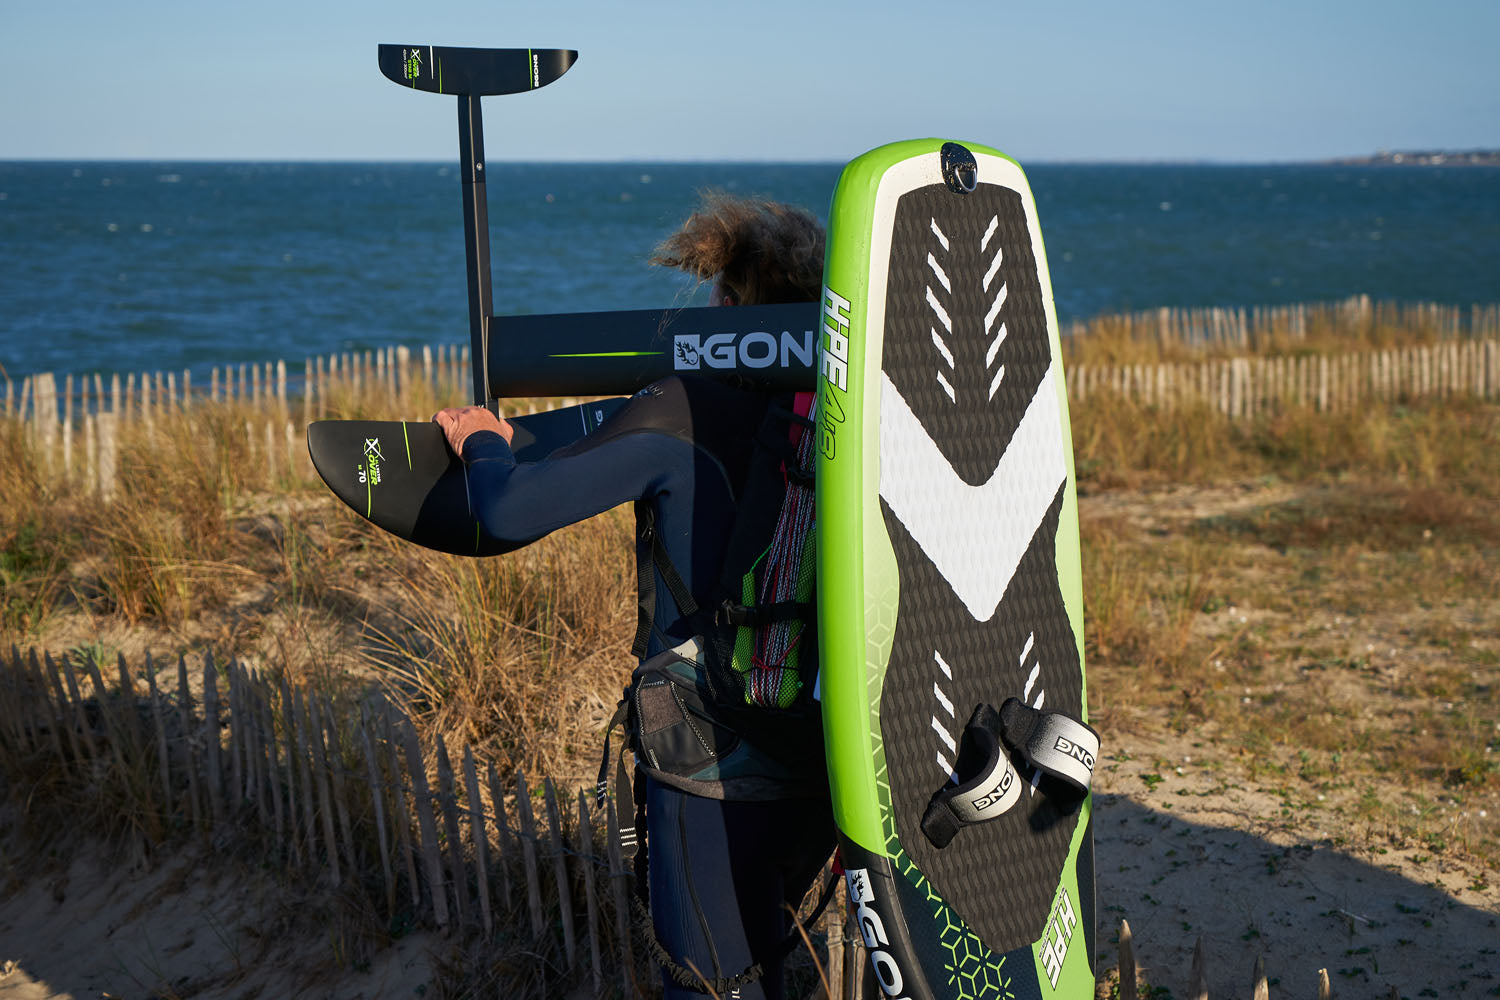 SHOP: START KITE FOILING WITH THE STARTER PACK!